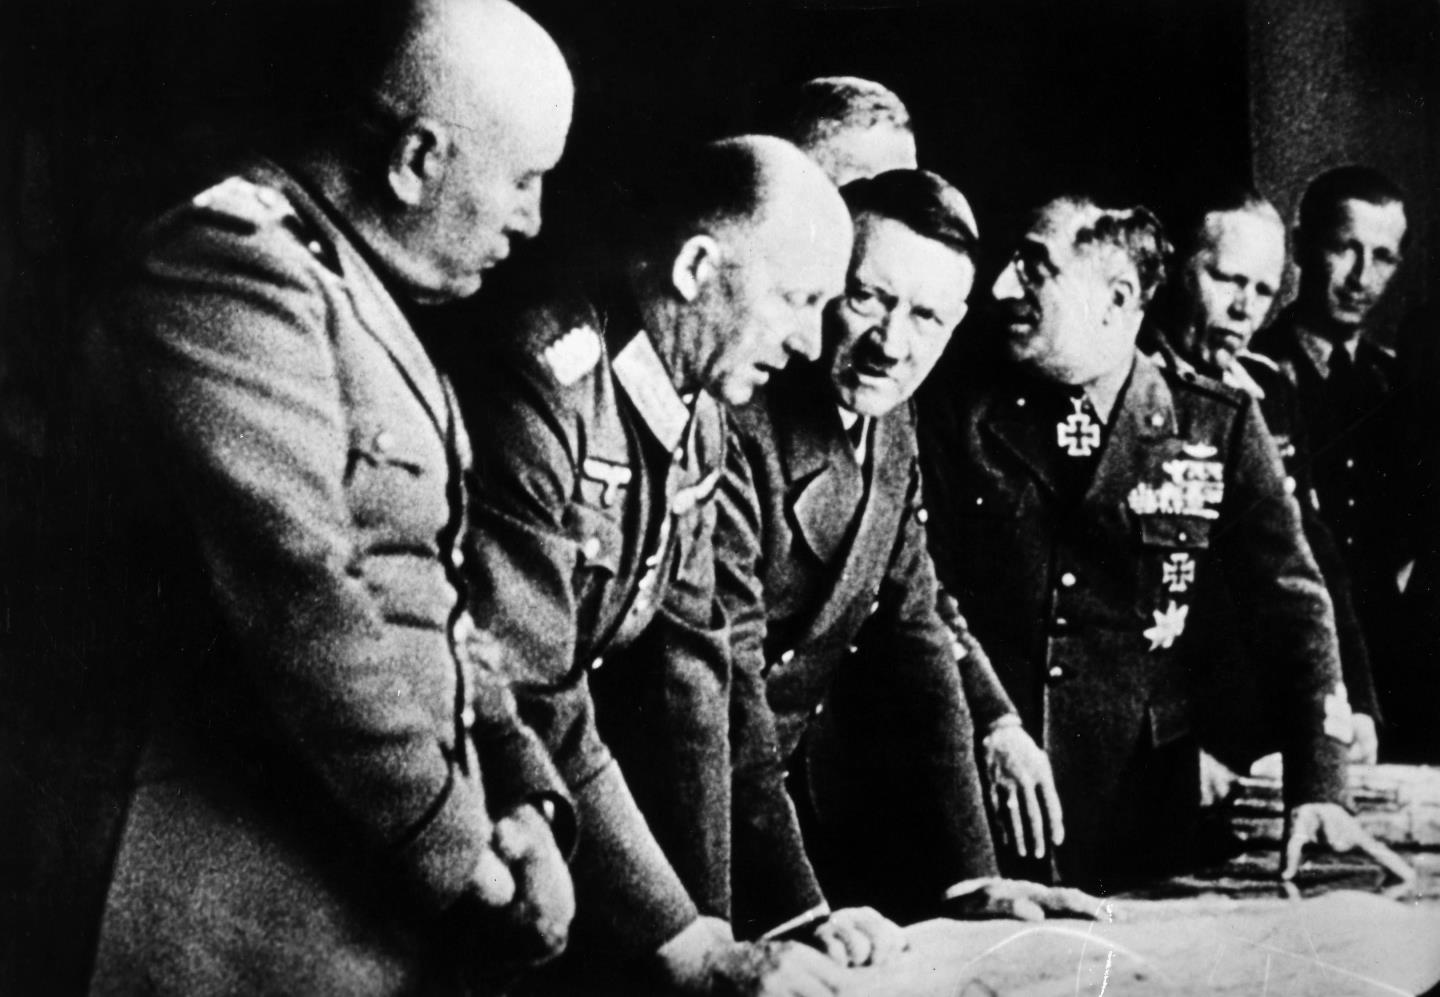 Hitler and the German Chancellor were joined by Mussolini to plan their takeover.